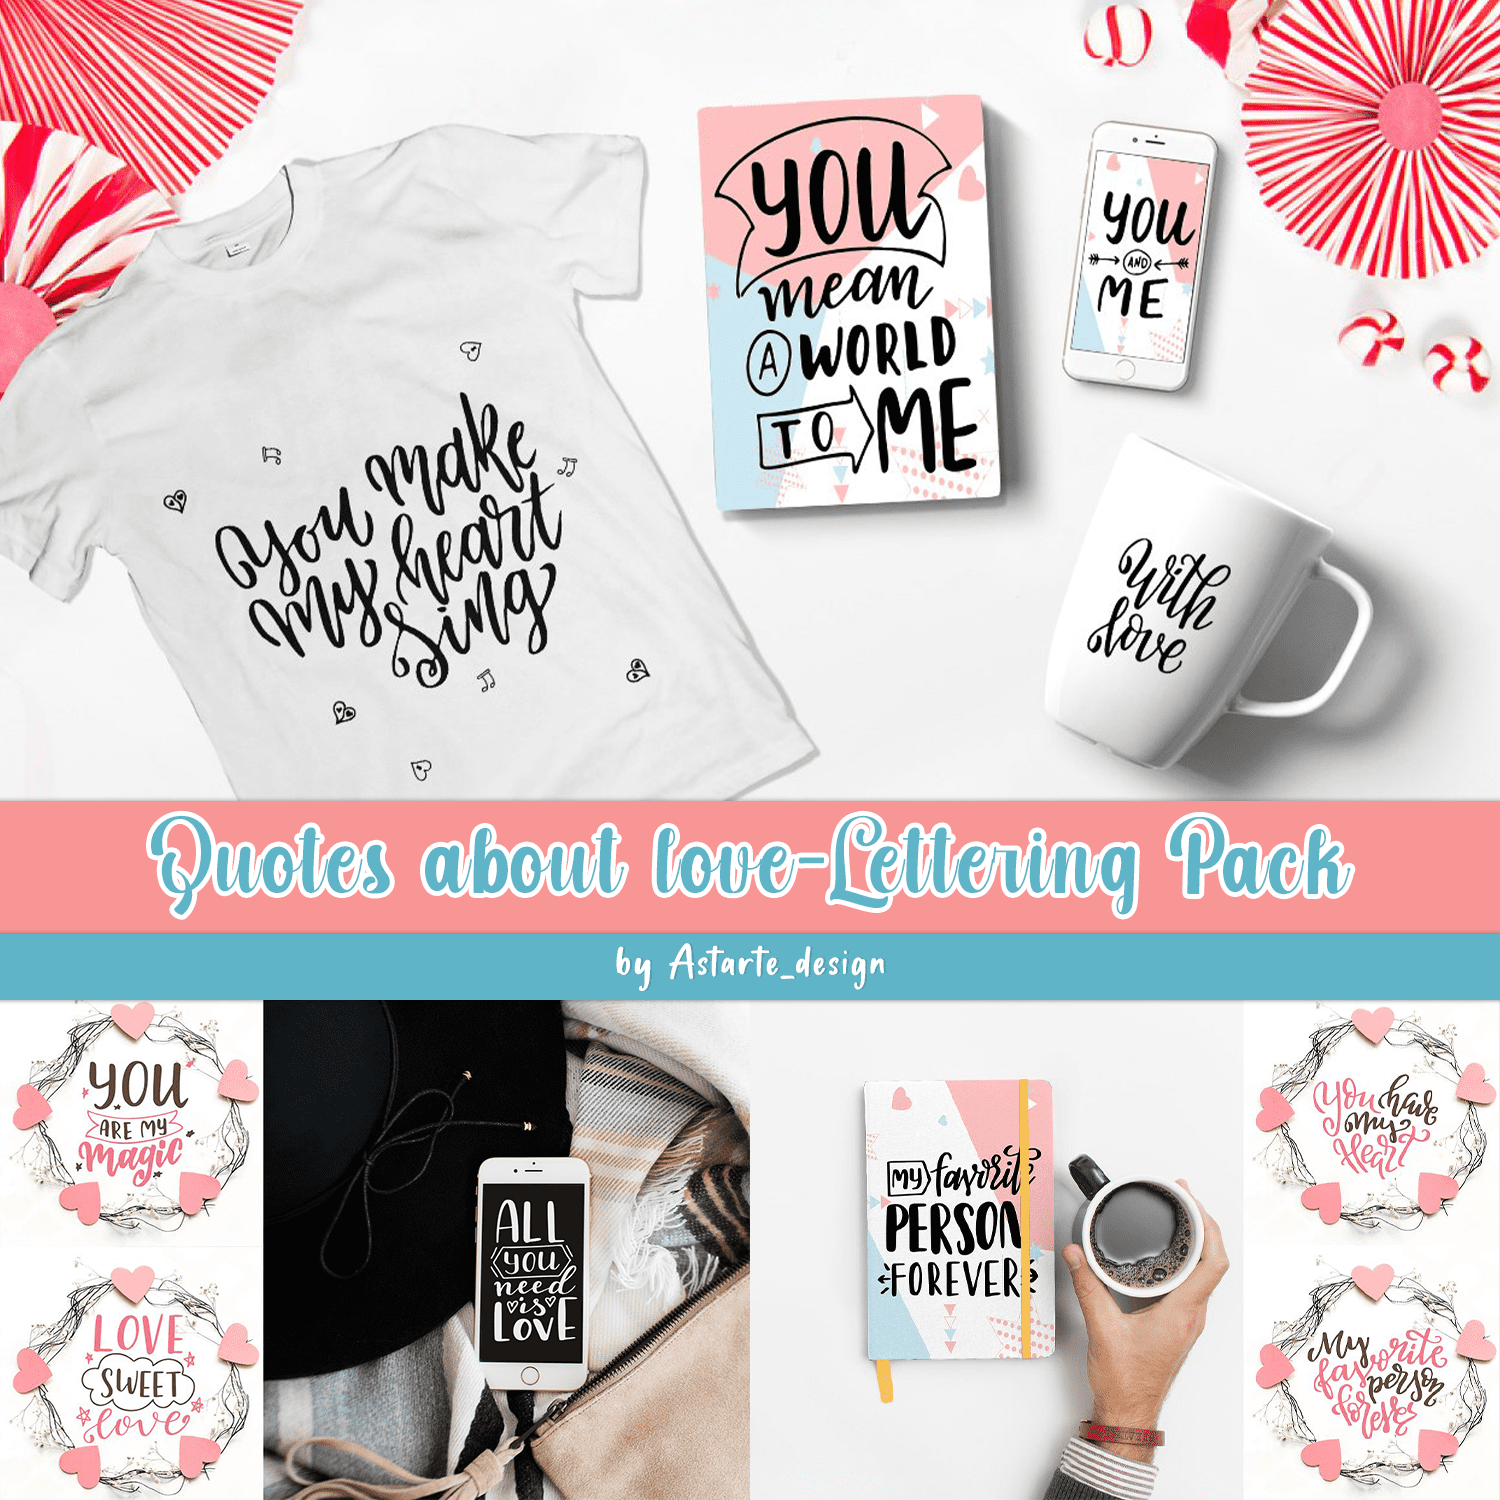 Quotes about love-Lettering Pack Astarte_design.